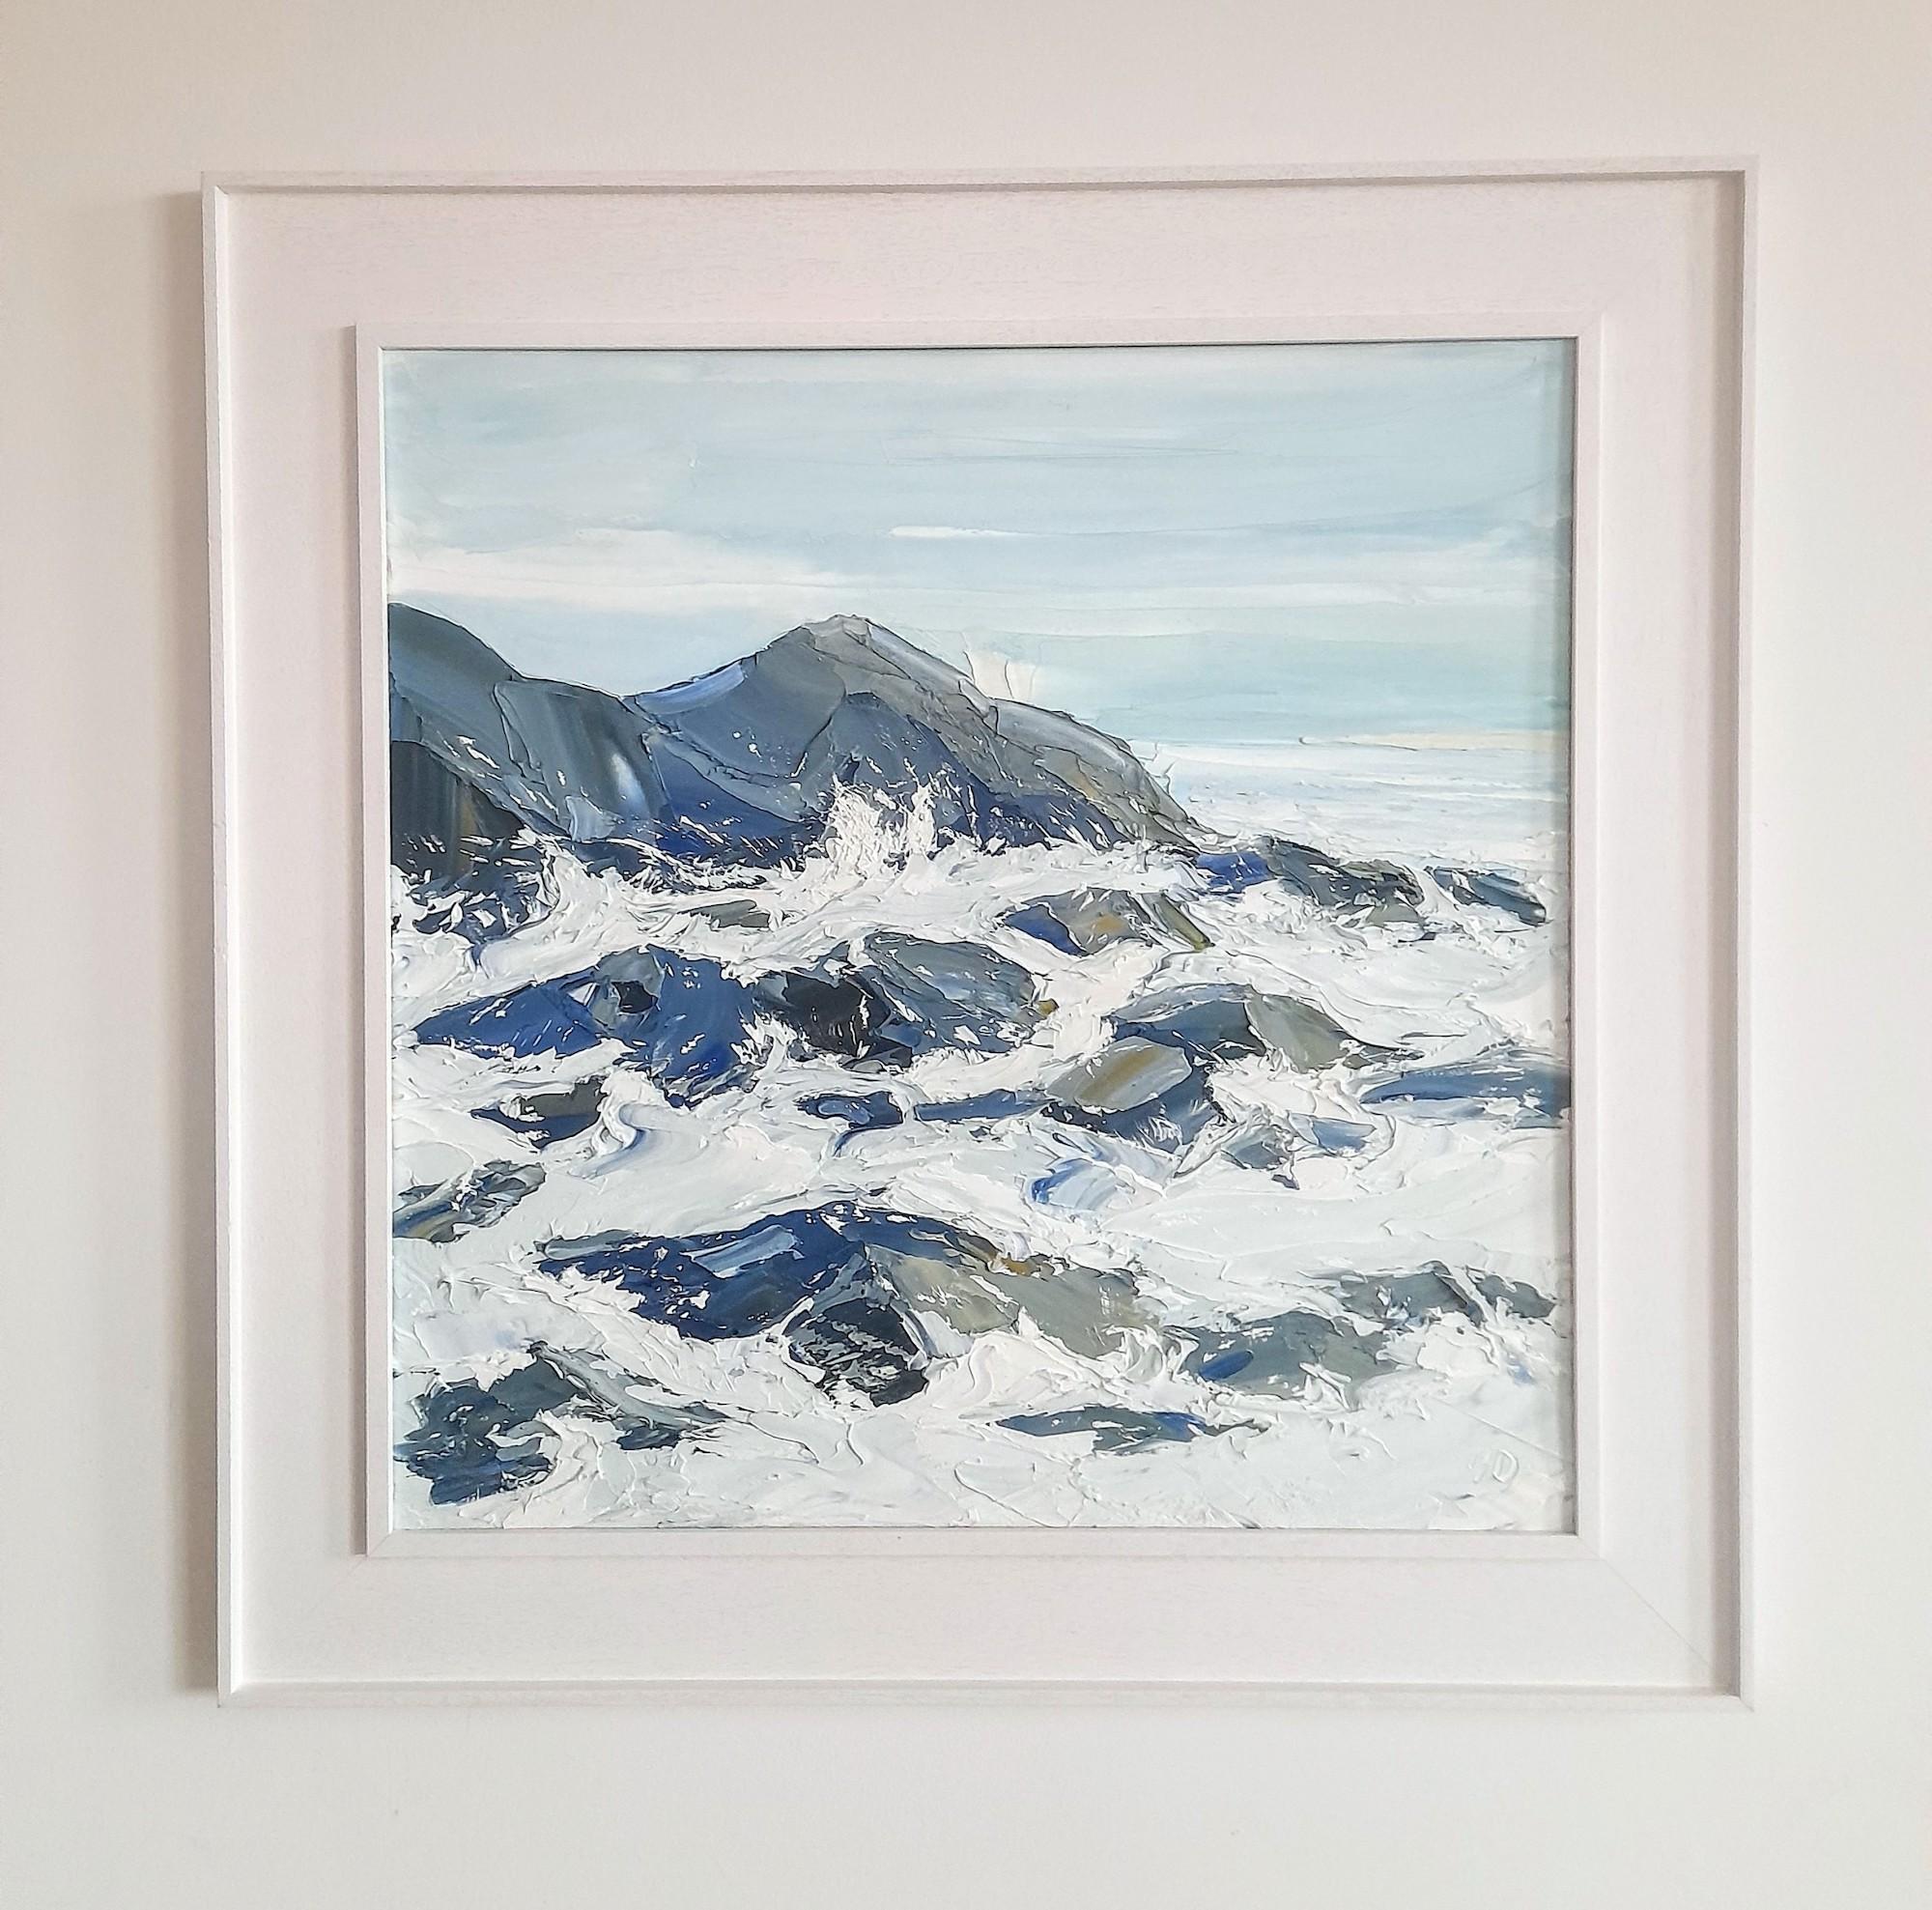 White Water by Georgie Dowling is an original oil painting portraying the scene of the sea crashing over the rocks at the breakwater in Bude, Cornwall. The colour palette is cool and muted yet is full of varied tones. The paint was applied thickly